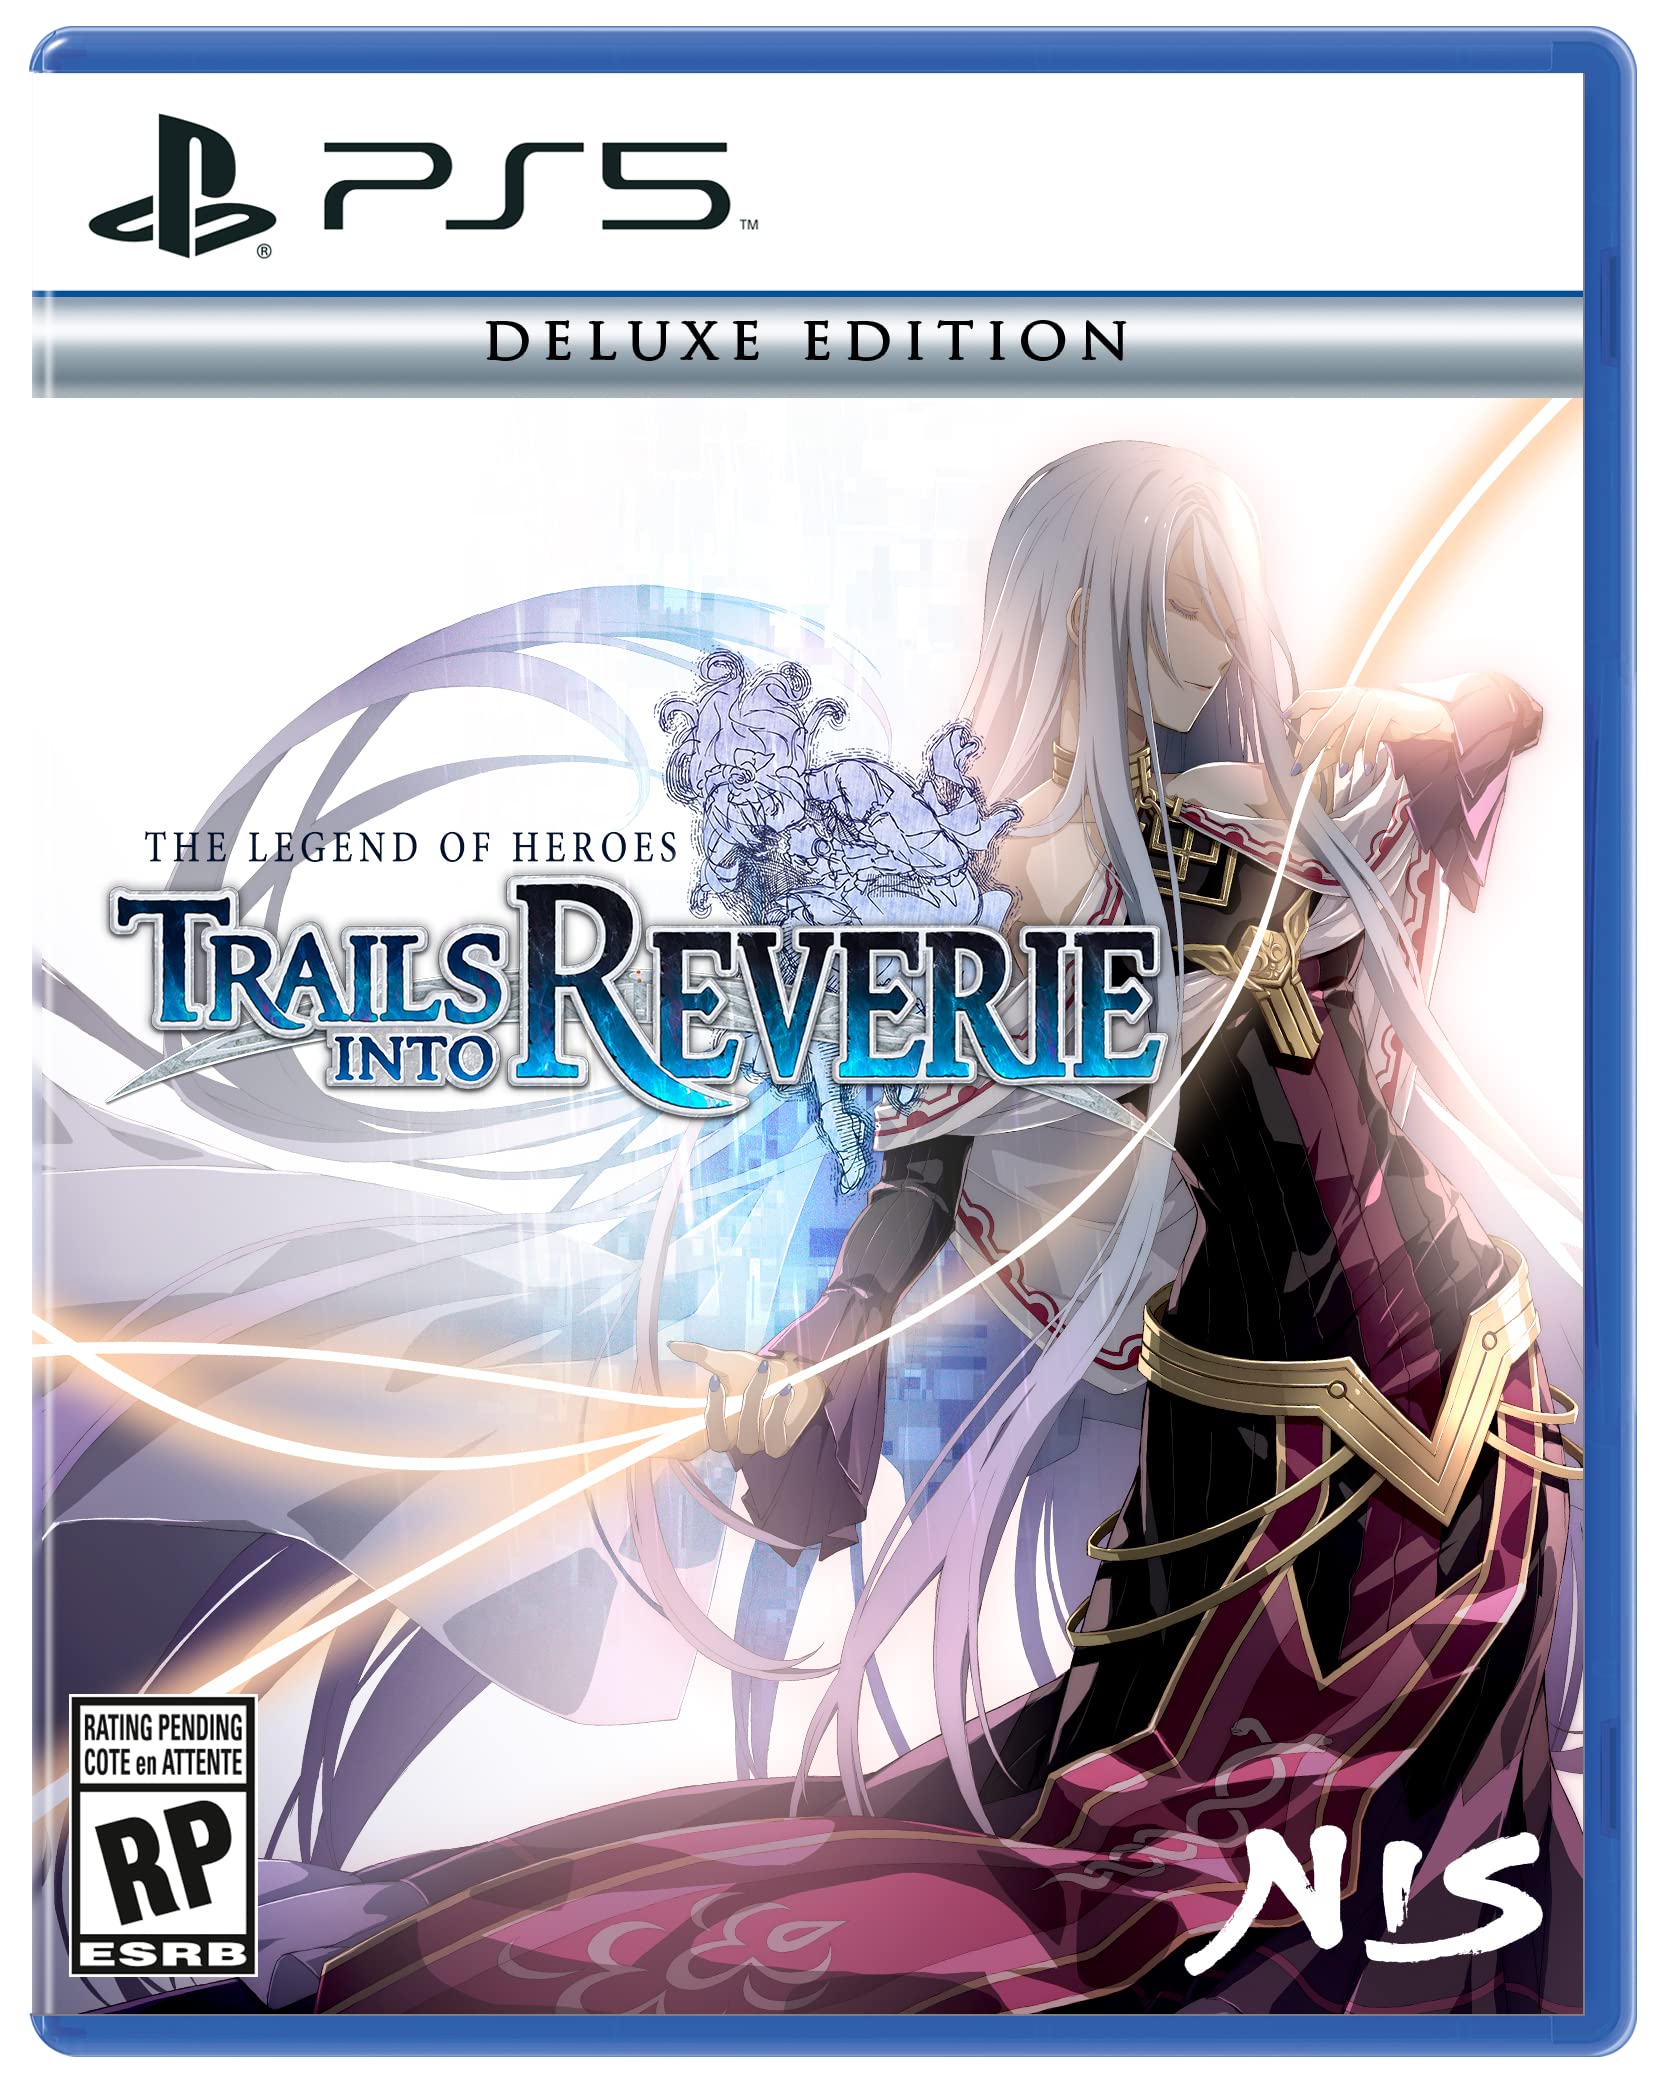 The Legend of Heroes: Trails into Reverie 5, Koei Tecmo America Corpor: Video Games